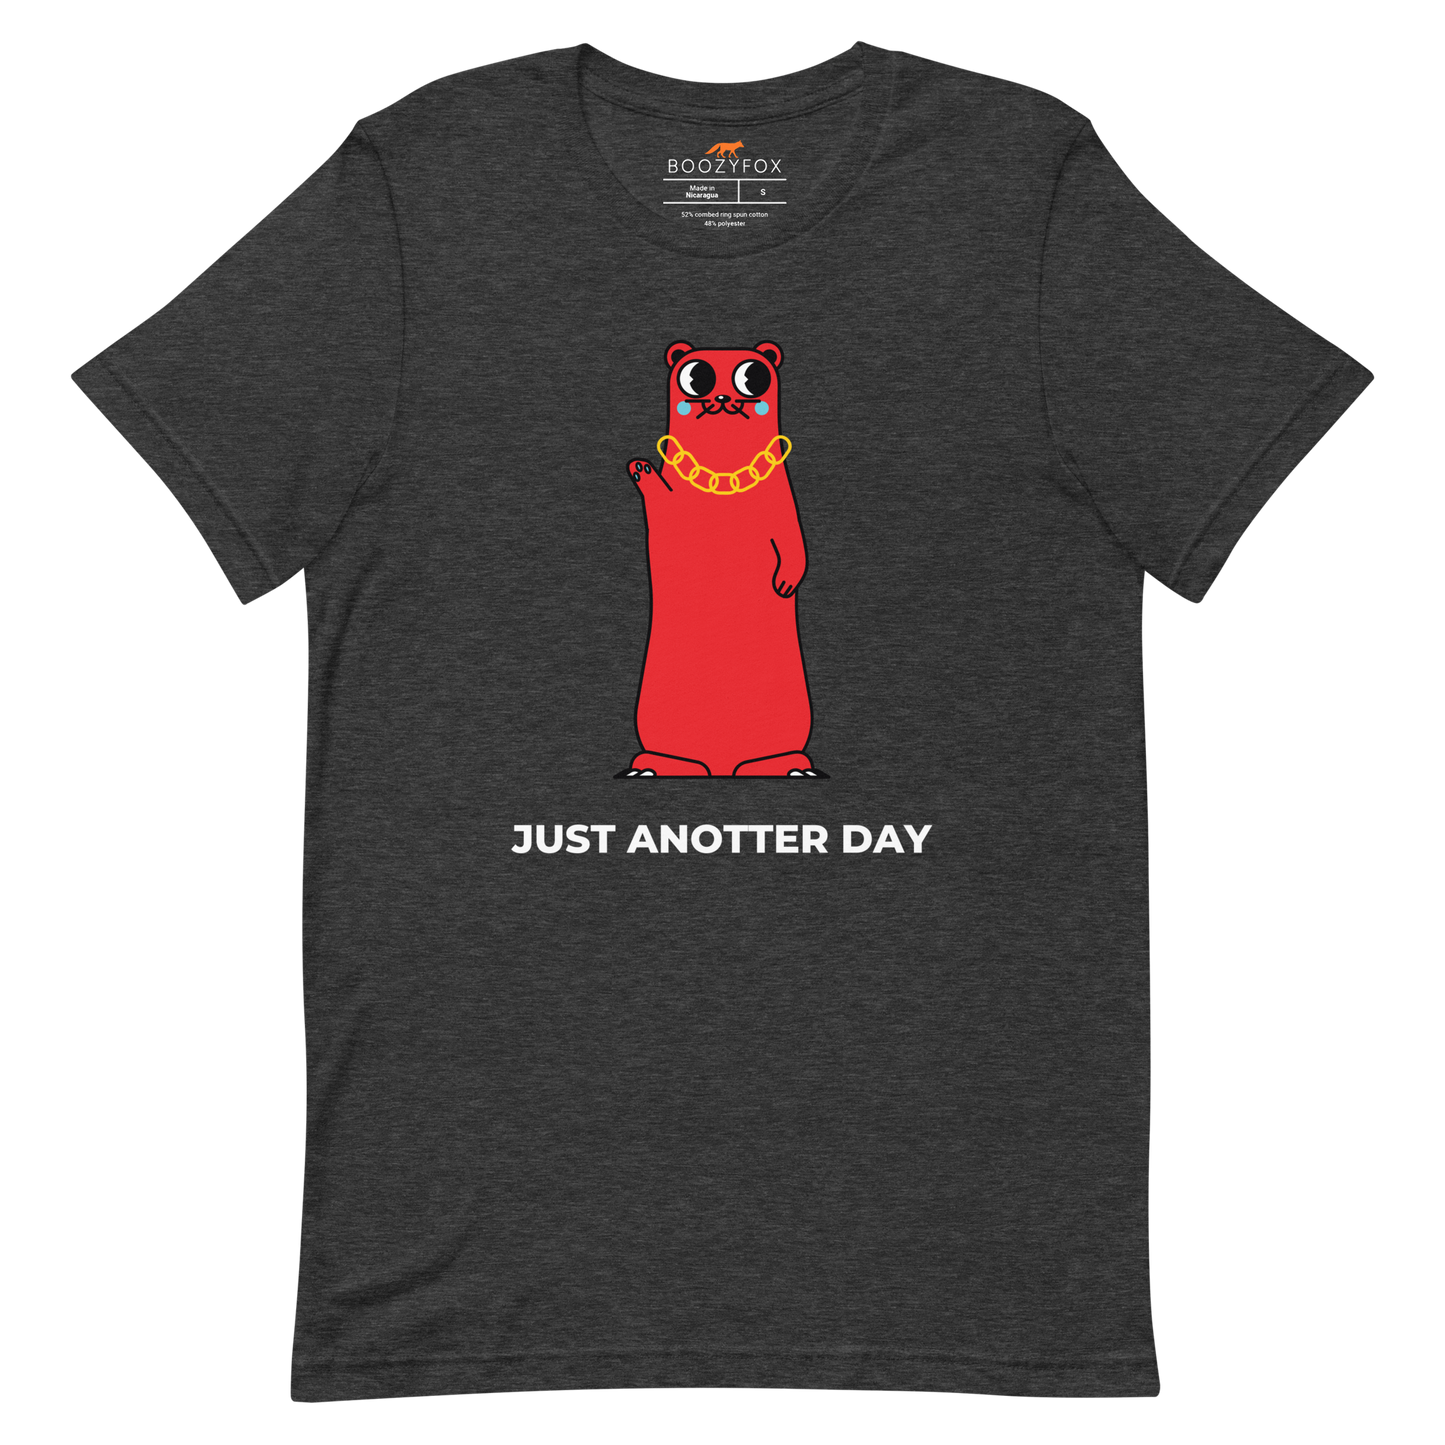 Dark Grey Heather Premium Otter T-Shirt featuring a Just Anotter Day graphic on the chest - Funny Graphic Otter Tees - Boozy Fox